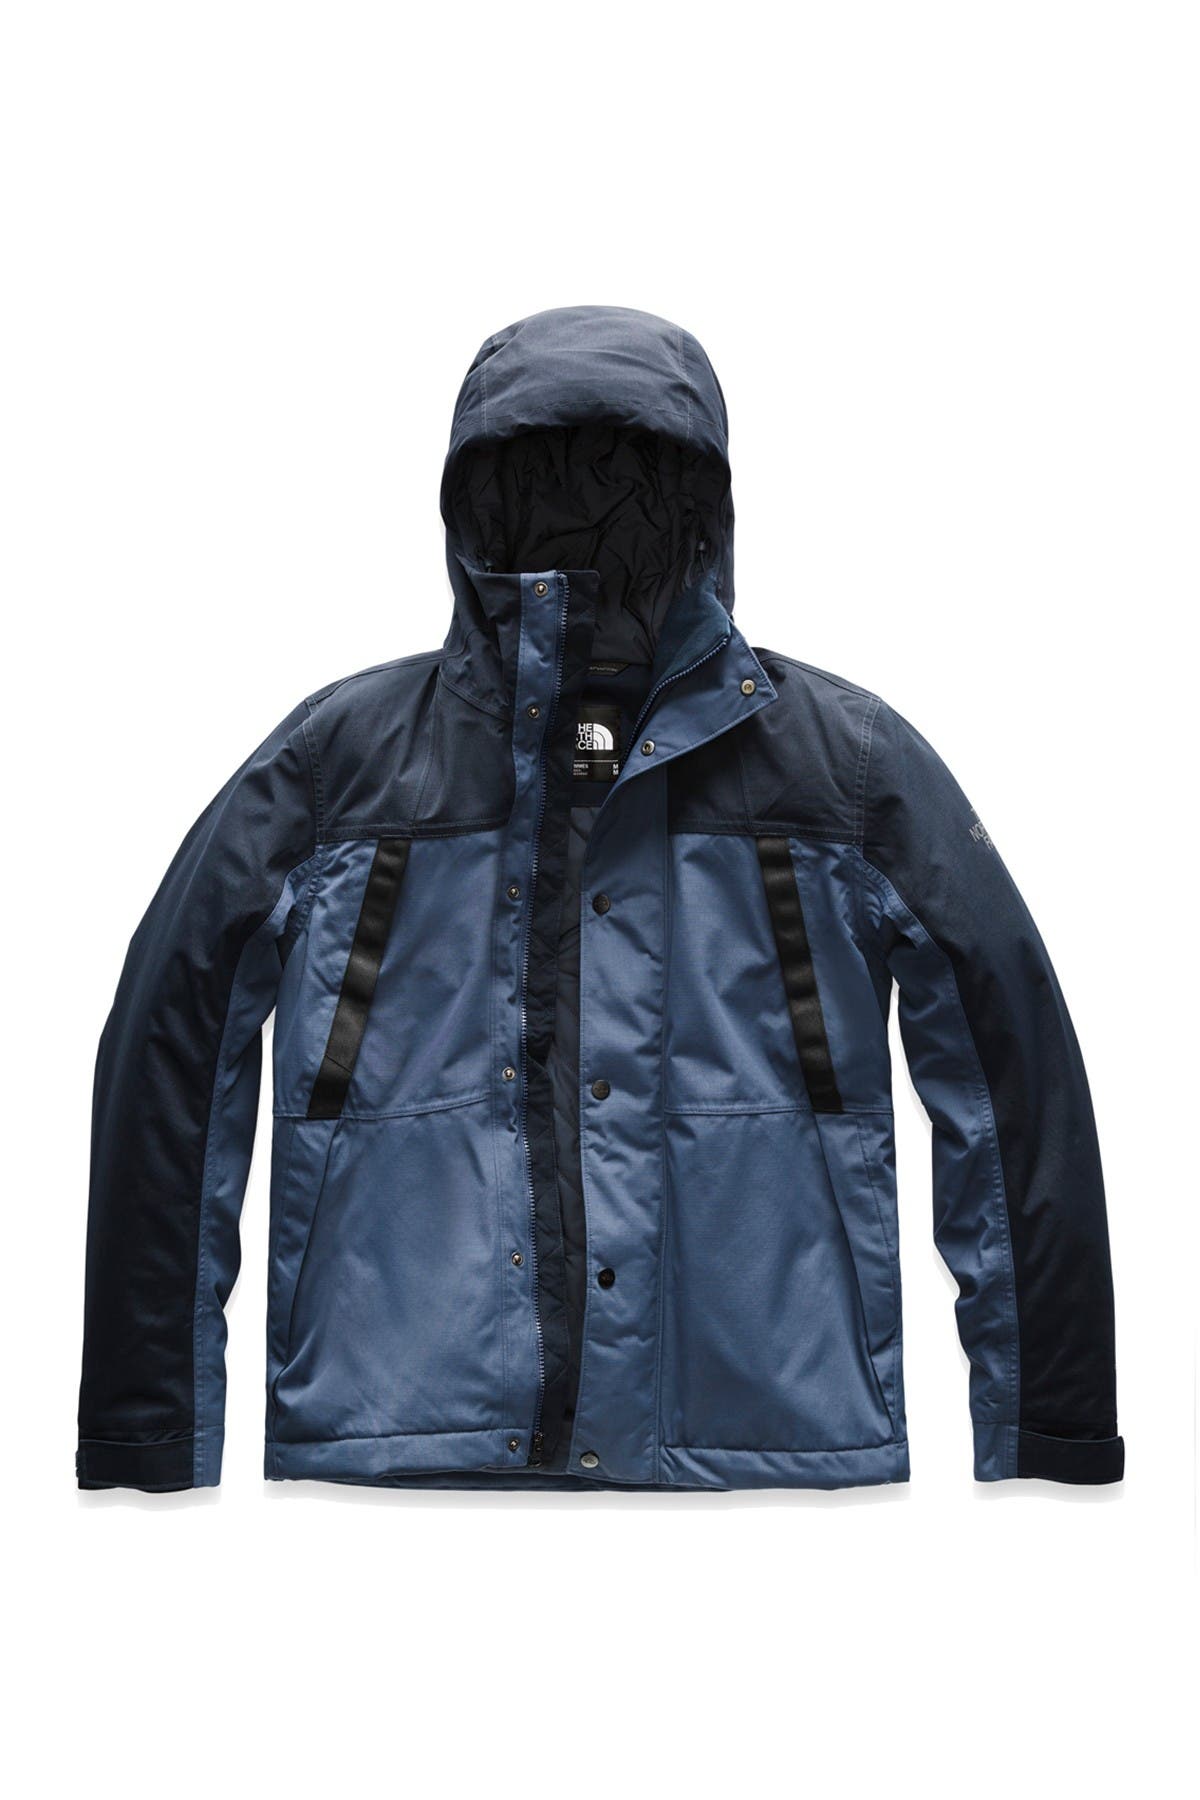 north face stetler jacket review